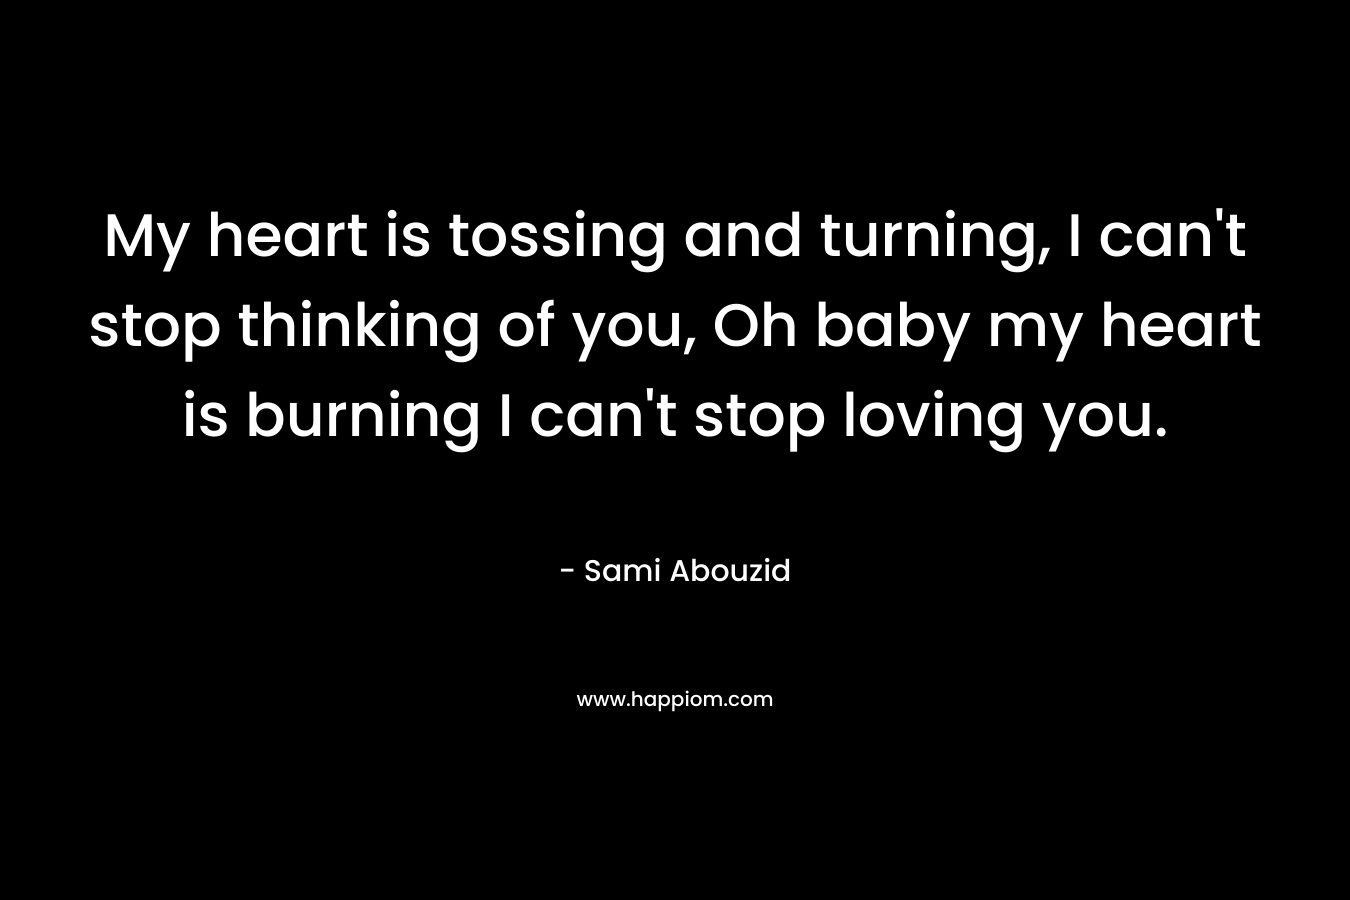 My heart is tossing and turning, I can't stop thinking of you, Oh baby my heart is burning I can't stop loving you.